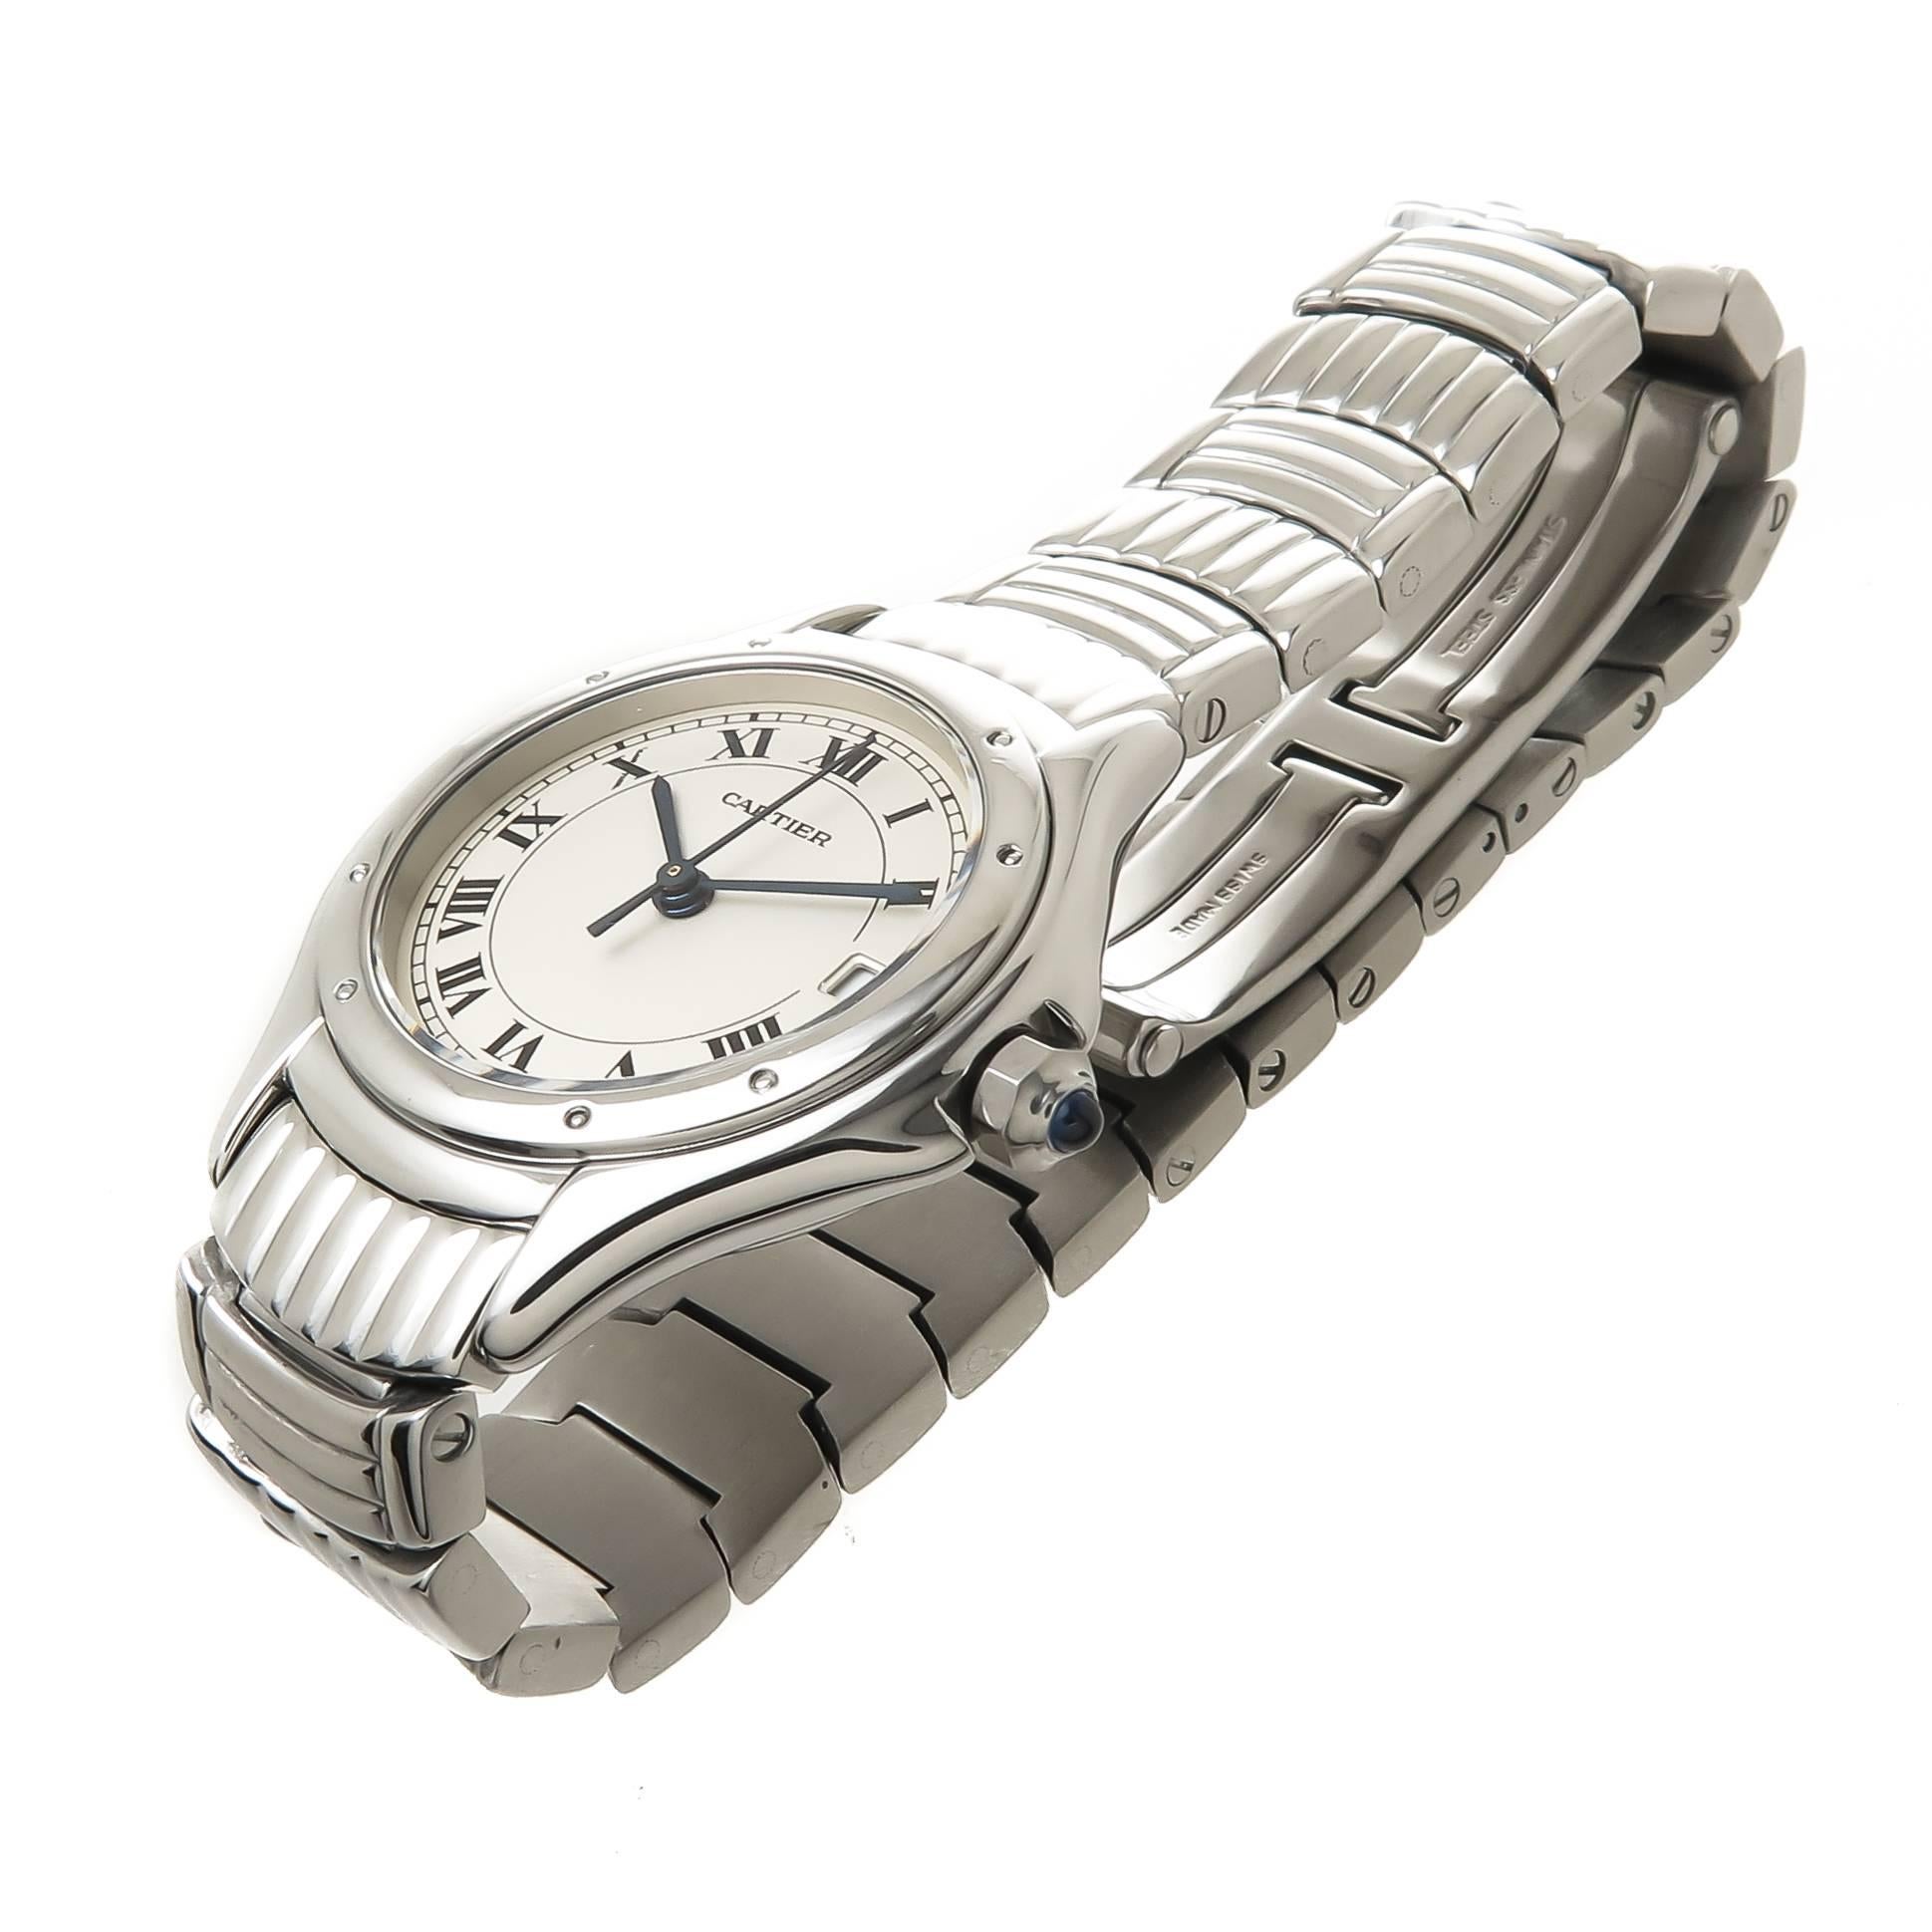 Circa 2005 Cartier Santos Ronde Collection ladies wrist watch, 26 MM Stainless Steel water resistant Case, Quartz Movement, Silvered Dial with Black Roman numerals, sweep seconds hand,  Calendar window at the 3 position and a sapphire Crown. 1/2